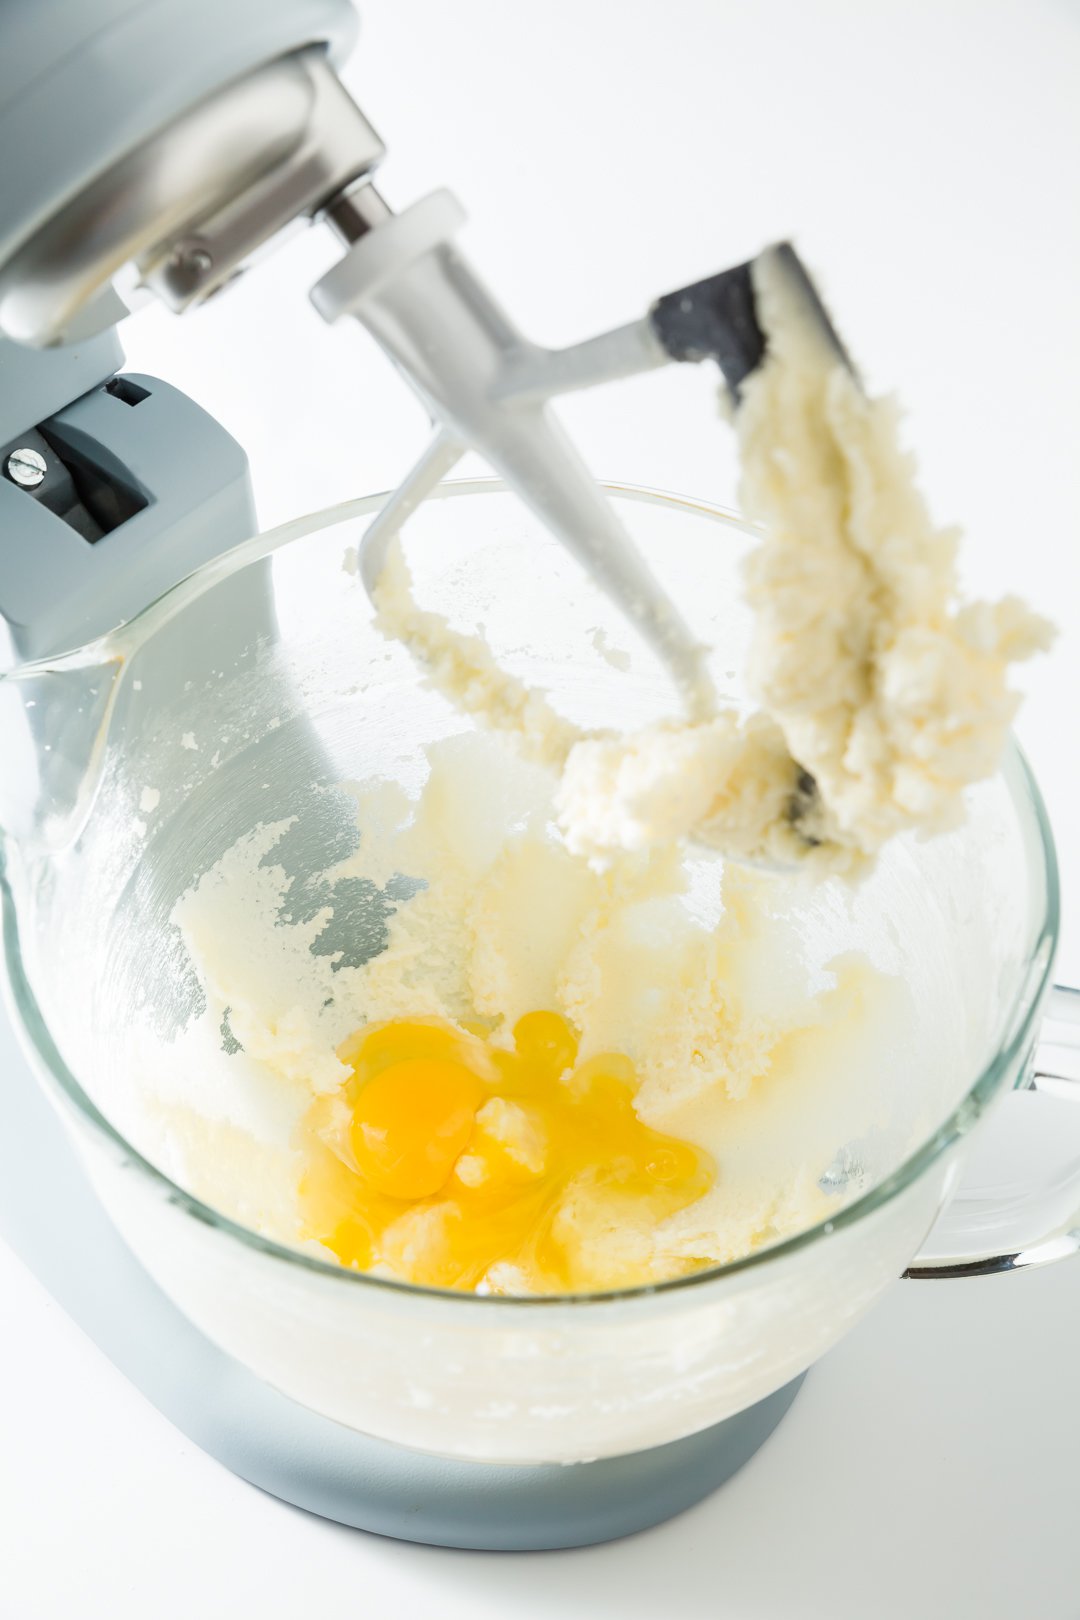 Adding eggs to stand mixer with butter and sugar